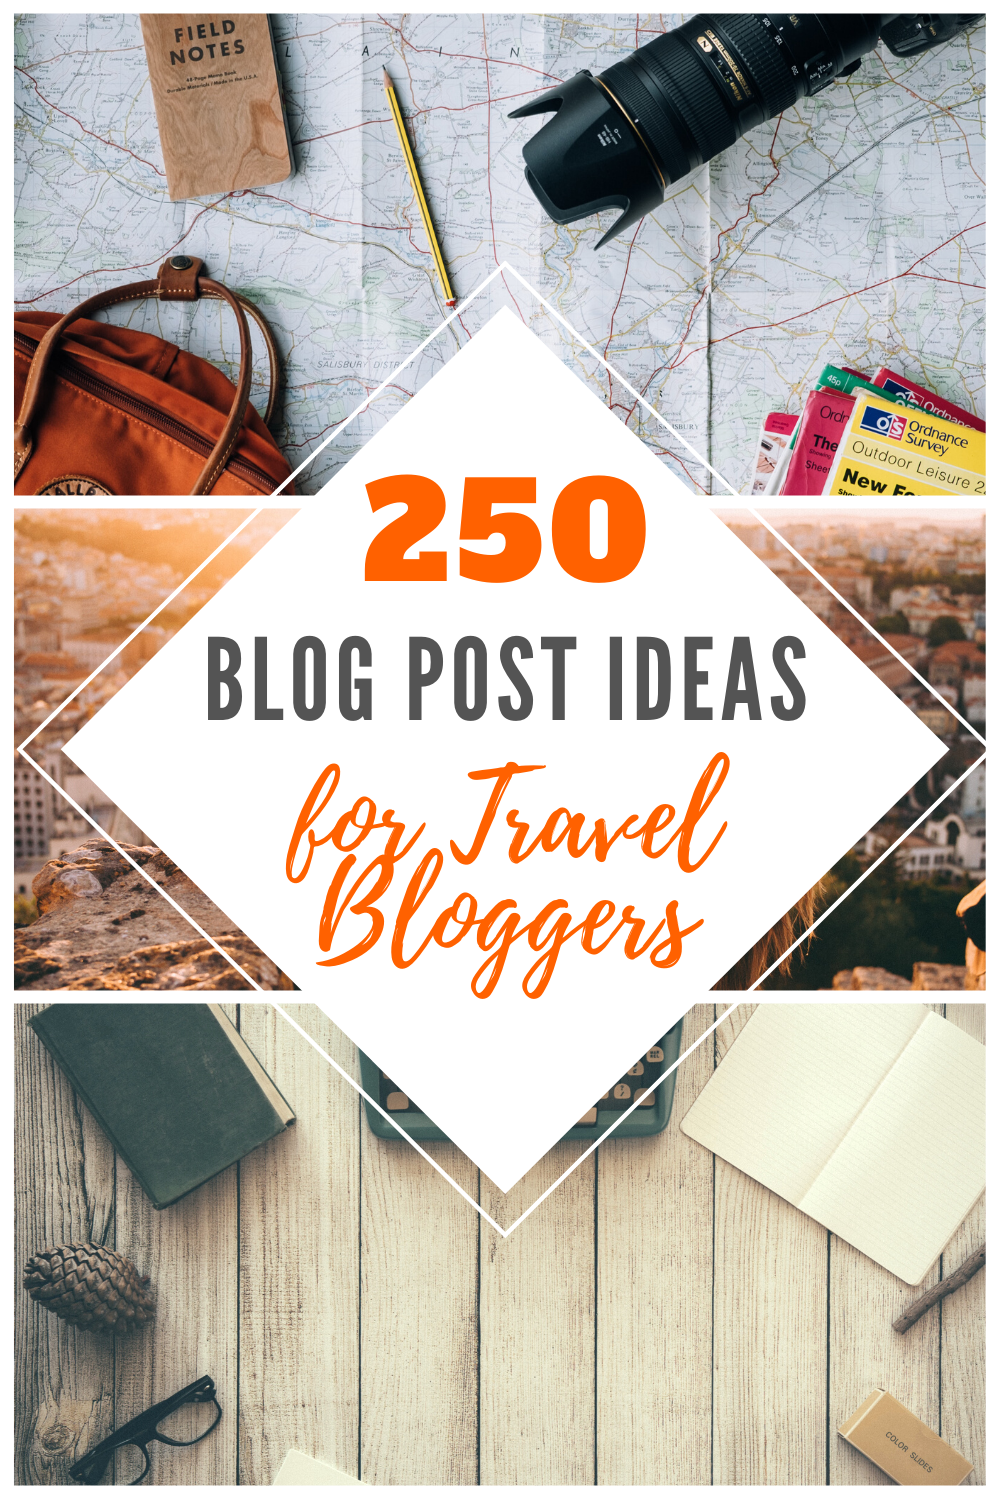 Blog Post Ideas for Travel Bloggers